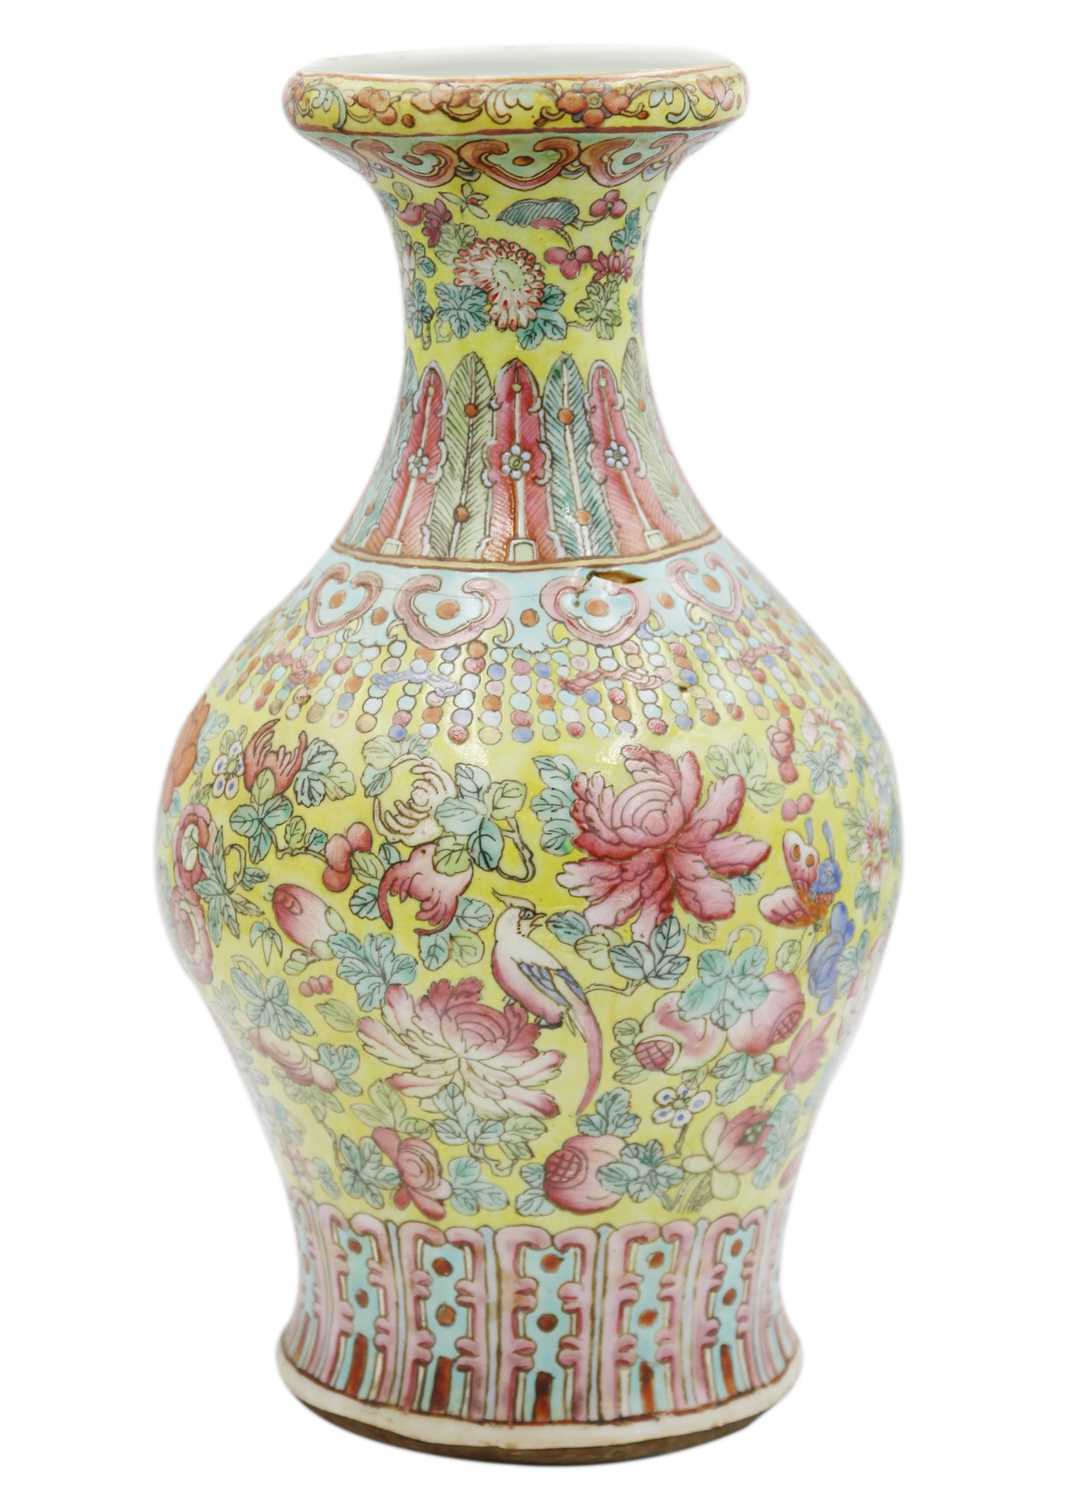 A Chinese famille juan porcelain vase, Tongzhi mark and period. (1861-1874) - Image 5 of 7